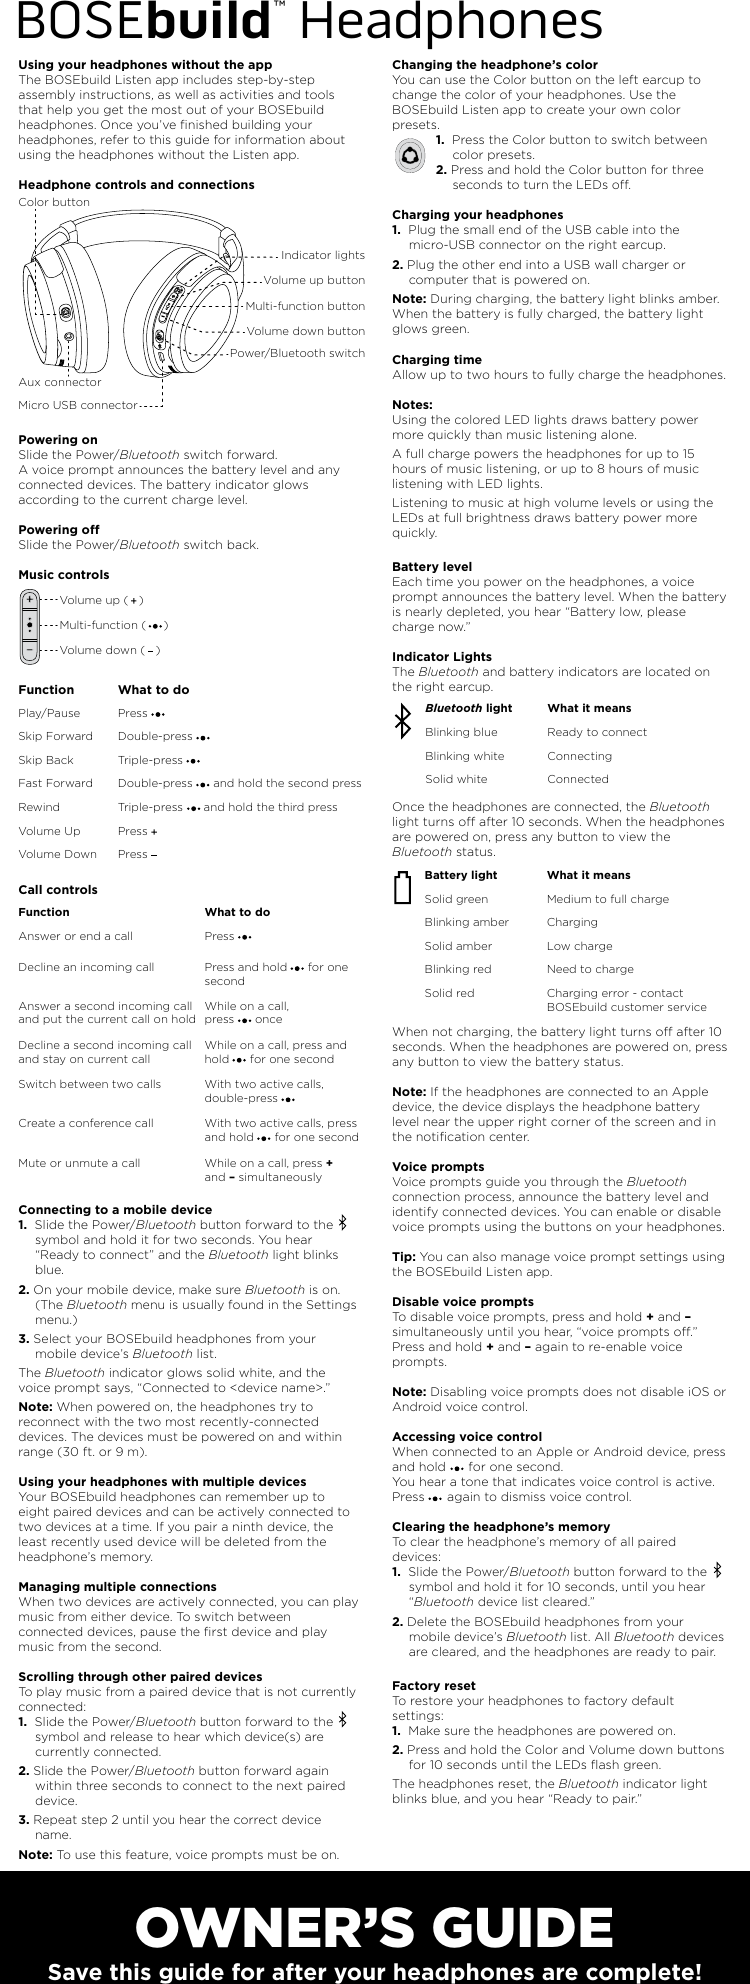 OWNER’S GUIDESave this guide for after your headphones are complete!BOSEbuild™ HeadphonesUsing your headphones without the appThe BOSEbuild Listen app includes step-by-step assembly instructions, as well as activities and tools that help you get the most out of your BOSEbuild headphones. Once you’ve ﬁnished building your headphones, refer to this guide for information about using the headphones without the Listen app.Headphone controls and connectionsPowering onSlide the Power/Bluetooth switch forward.A voice prompt announces the battery level and any connected devices. The battery indicator glows according to the current charge level. Powering oSlide the Power/Bluetooth switch back.Music controlsCall controlsConnecting to a mobile device1.  Slide the Power/Bluetooth button forward to the     symbol and hold it for two seconds. You hear “Ready to connect” and the Bluetooth light blinks blue.2. On your mobile device, make sure Bluetooth is on. (The Bluetooth menu is usually found in the Settings menu.) 3. Select your BOSEbuild headphones from your mobile device’s Bluetooth list.The Bluetooth indicator glows solid white, and the voice prompt says, “Connected to &lt;device name&gt;.” Note: When powered on, the headphones try to reconnect with the two most recently-connected devices. The devices must be powered on and within range (30 ft. or 9 m).Using your headphones with multiple devices Your BOSEbuild headphones can remember up to eight paired devices and can be actively connected to two devices at a time. If you pair a ninth device, the least recently used device will be deleted from the headphone’s memory. Managing multiple connections When two devices are actively connected, you can play music from either device. To switch between connected devices, pause the ﬁrst device and play music from the second. Scrolling through other paired devices To play music from a paired device that is not currently connected: 1.  Slide the Power/Bluetooth button forward to the     symbol and release to hear which device(s) are currently connected.2. Slide the Power/Bluetooth button forward again within three seconds to connect to the next paired device.3. Repeat step 2 until you hear the correct device name. Note: To use this feature, voice prompts must be on.Changing the headphone’s color You can use the Color button on the left earcup to change the color of your headphones. Use the BOSEbuild Listen app to create your own color presets.1.  Press the Color button to switch between color presets.2. Press and hold the Color button for three seconds to turn the LEDs o.Charging your headphones1.  Plug the small end of the USB cable into the micro-USB connector on the right earcup. 2. Plug the other end into a USB wall charger or computer that is powered on. Note: During charging, the battery light blinks amber. When the battery is fully charged, the battery light glows green. Charging time Allow up to two hours to fully charge the headphones. Notes: Using the colored LED lights draws battery power more quickly than music listening alone.A full charge powers the headphones for up to 15 hours of music listening, or up to 8 hours of music listening with LED lights.Listening to music at high volume levels or using the LEDs at full brightness draws battery power more quickly.Battery level Each time you power on the headphones, a voice prompt announces the battery level. When the battery is nearly depleted, you hear “Battery low, please charge now.” Indicator LightsThe Bluetooth and battery indicators are located on the right earcup.Once the headphones are connected, the Bluetooth light turns o after 10 seconds. When the headphones are powered on, press any button to view the Bluetooth status.When not charging, the battery light turns o after 10 seconds. When the headphones are powered on, press any button to view the battery status.Note: If the headphones are connected to an Apple device, the device displays the headphone battery level near the upper right corner of the screen and in the notiﬁcation center. Voice prompts Voice prompts guide you through the Bluetooth connection process, announce the battery level and identify connected devices. You can enable or disable voice prompts using the buttons on your headphones. Tip: You can also manage voice prompt settings using the BOSEbuild Listen app. Disable voice prompts To disable voice prompts, press and hold + and – simultaneously until you hear, “voice prompts o.” Press and hold + and – again to re-enable voice prompts.Note: Disabling voice prompts does not disable iOS or Android voice control.Accessing voice controlWhen connected to an Apple or Android device, press and hold      for one second.You hear a tone that indicates voice control is active. Press      again to dismiss voice control.  Clearing the headphone’s memory To clear the headphone’s memory of all paired devices: 1.  Slide the Power/Bluetooth button forward to the      symbol and hold it for 10 seconds, until you hear “Bluetooth device list cleared.” 2. Delete the BOSEbuild headphones from your mobile device’s Bluetooth list. All Bluetooth devices are cleared, and the headphones are ready to pair. Factory resetTo restore your headphones to factory default settings:1.  Make sure the headphones are powered on.2. Press and hold the Color and Volume down buttons for 10 seconds until the LEDs ﬂash green.The headphones reset, the Bluetooth indicator light blinks blue, and you hear “Ready to pair.” Bluetooth light What it means Blinking blue  Ready to connectBlinking white  ConnectingSolid white ConnectedBattery light What it means Solid green  Medium to full chargeBlinking amber ChargingSolid amber  Low chargeBlinking red Need to charge Solid red  Charging error - contact BOSEbuild customer serviceFunction What to do Play/Pause Press  Skip Forward Double-press Skip Back Triple-press Fast Forward Double-press      and hold the second pressRewind Triple-press      and hold the third pressVolume Up Press Volume Down PressVolume up buttonColor buttonVolume down buttonMulti-function buttonPower/Bluetooth switchAux connectorMicro USB connectorIndicator lightsVolume up (   )Multi-function (     ) Volume down (   )Function What to do Answer or end a call Press        Decline an incoming call Press and hold      for one secondAnswer a second incoming call and put the current call on holdWhile on a call, press      onceDecline a second incoming call and stay on current callWhile on a call, press and hold      for one secondSwitch between two calls  With two active calls, double-press       Create a conference call  With two active calls, press and hold      for one secondMute or unmute a call  While on a call, press + and – simultaneously